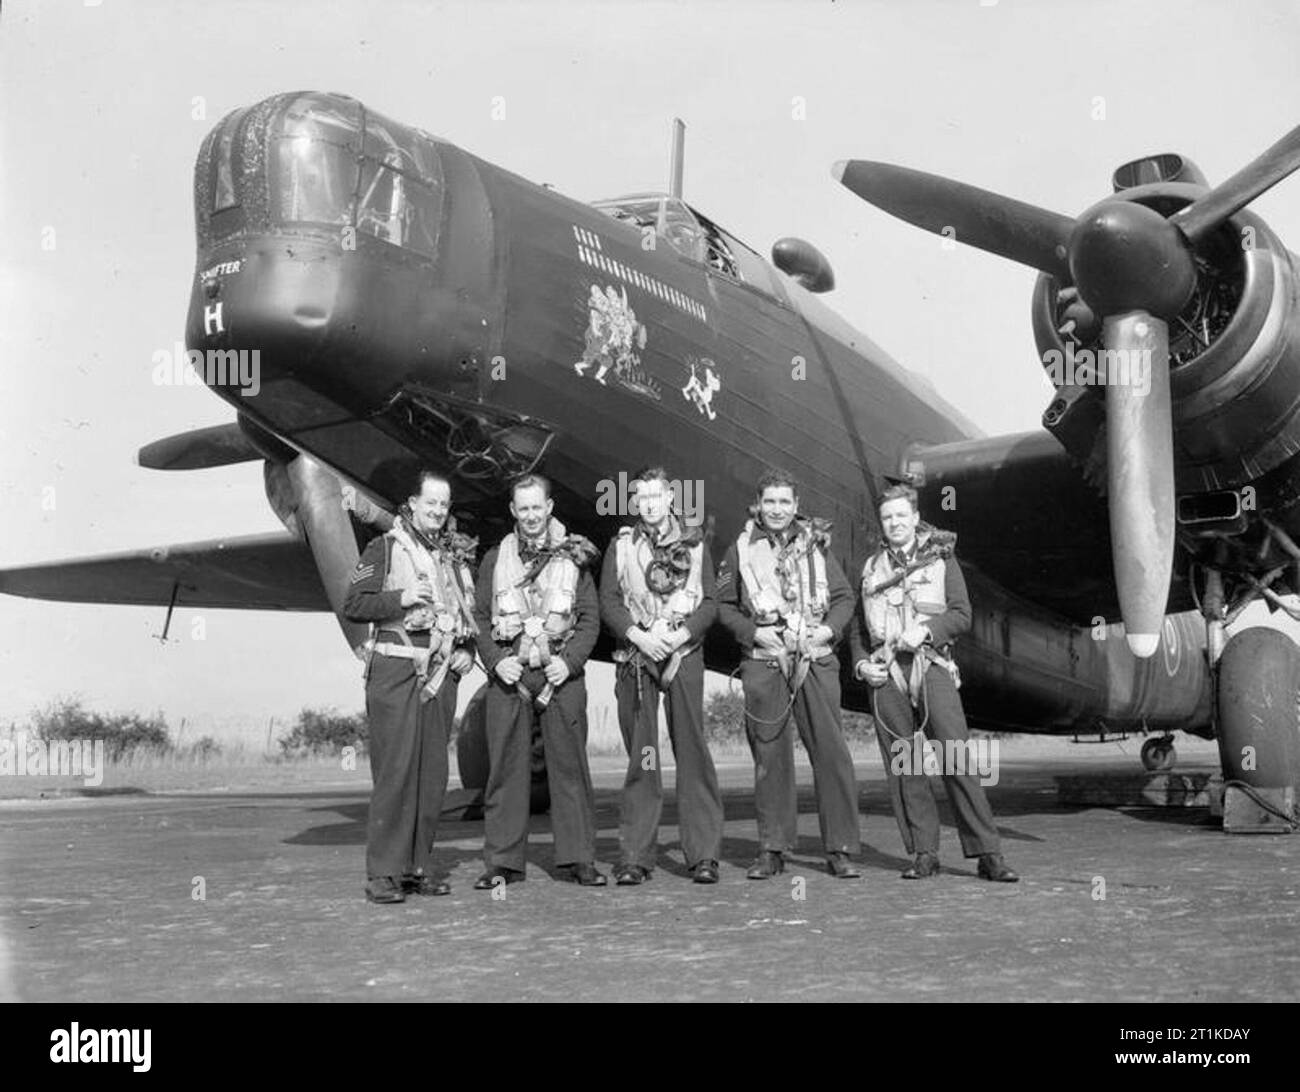 The Royal Australian Air Force in Britain, 1943 The first all Australian crew in Bomber Command to complete a tour of operations (with No 466 Squadron, Royal Australian Air Force) stand in front of their Vickers Wellington bomber at RAF Leconfield, Yorkshire. Left to right: Flight Sergeant J P Hetherington (bomb aimer), Pilot Officer A C Winston (rear gunner), Pilot Officer J H Cameron (captain), Flight Sergeant J Samuels (W/O - air gunner), and Pilot Officer J J Allan (navigator). Stock Photo